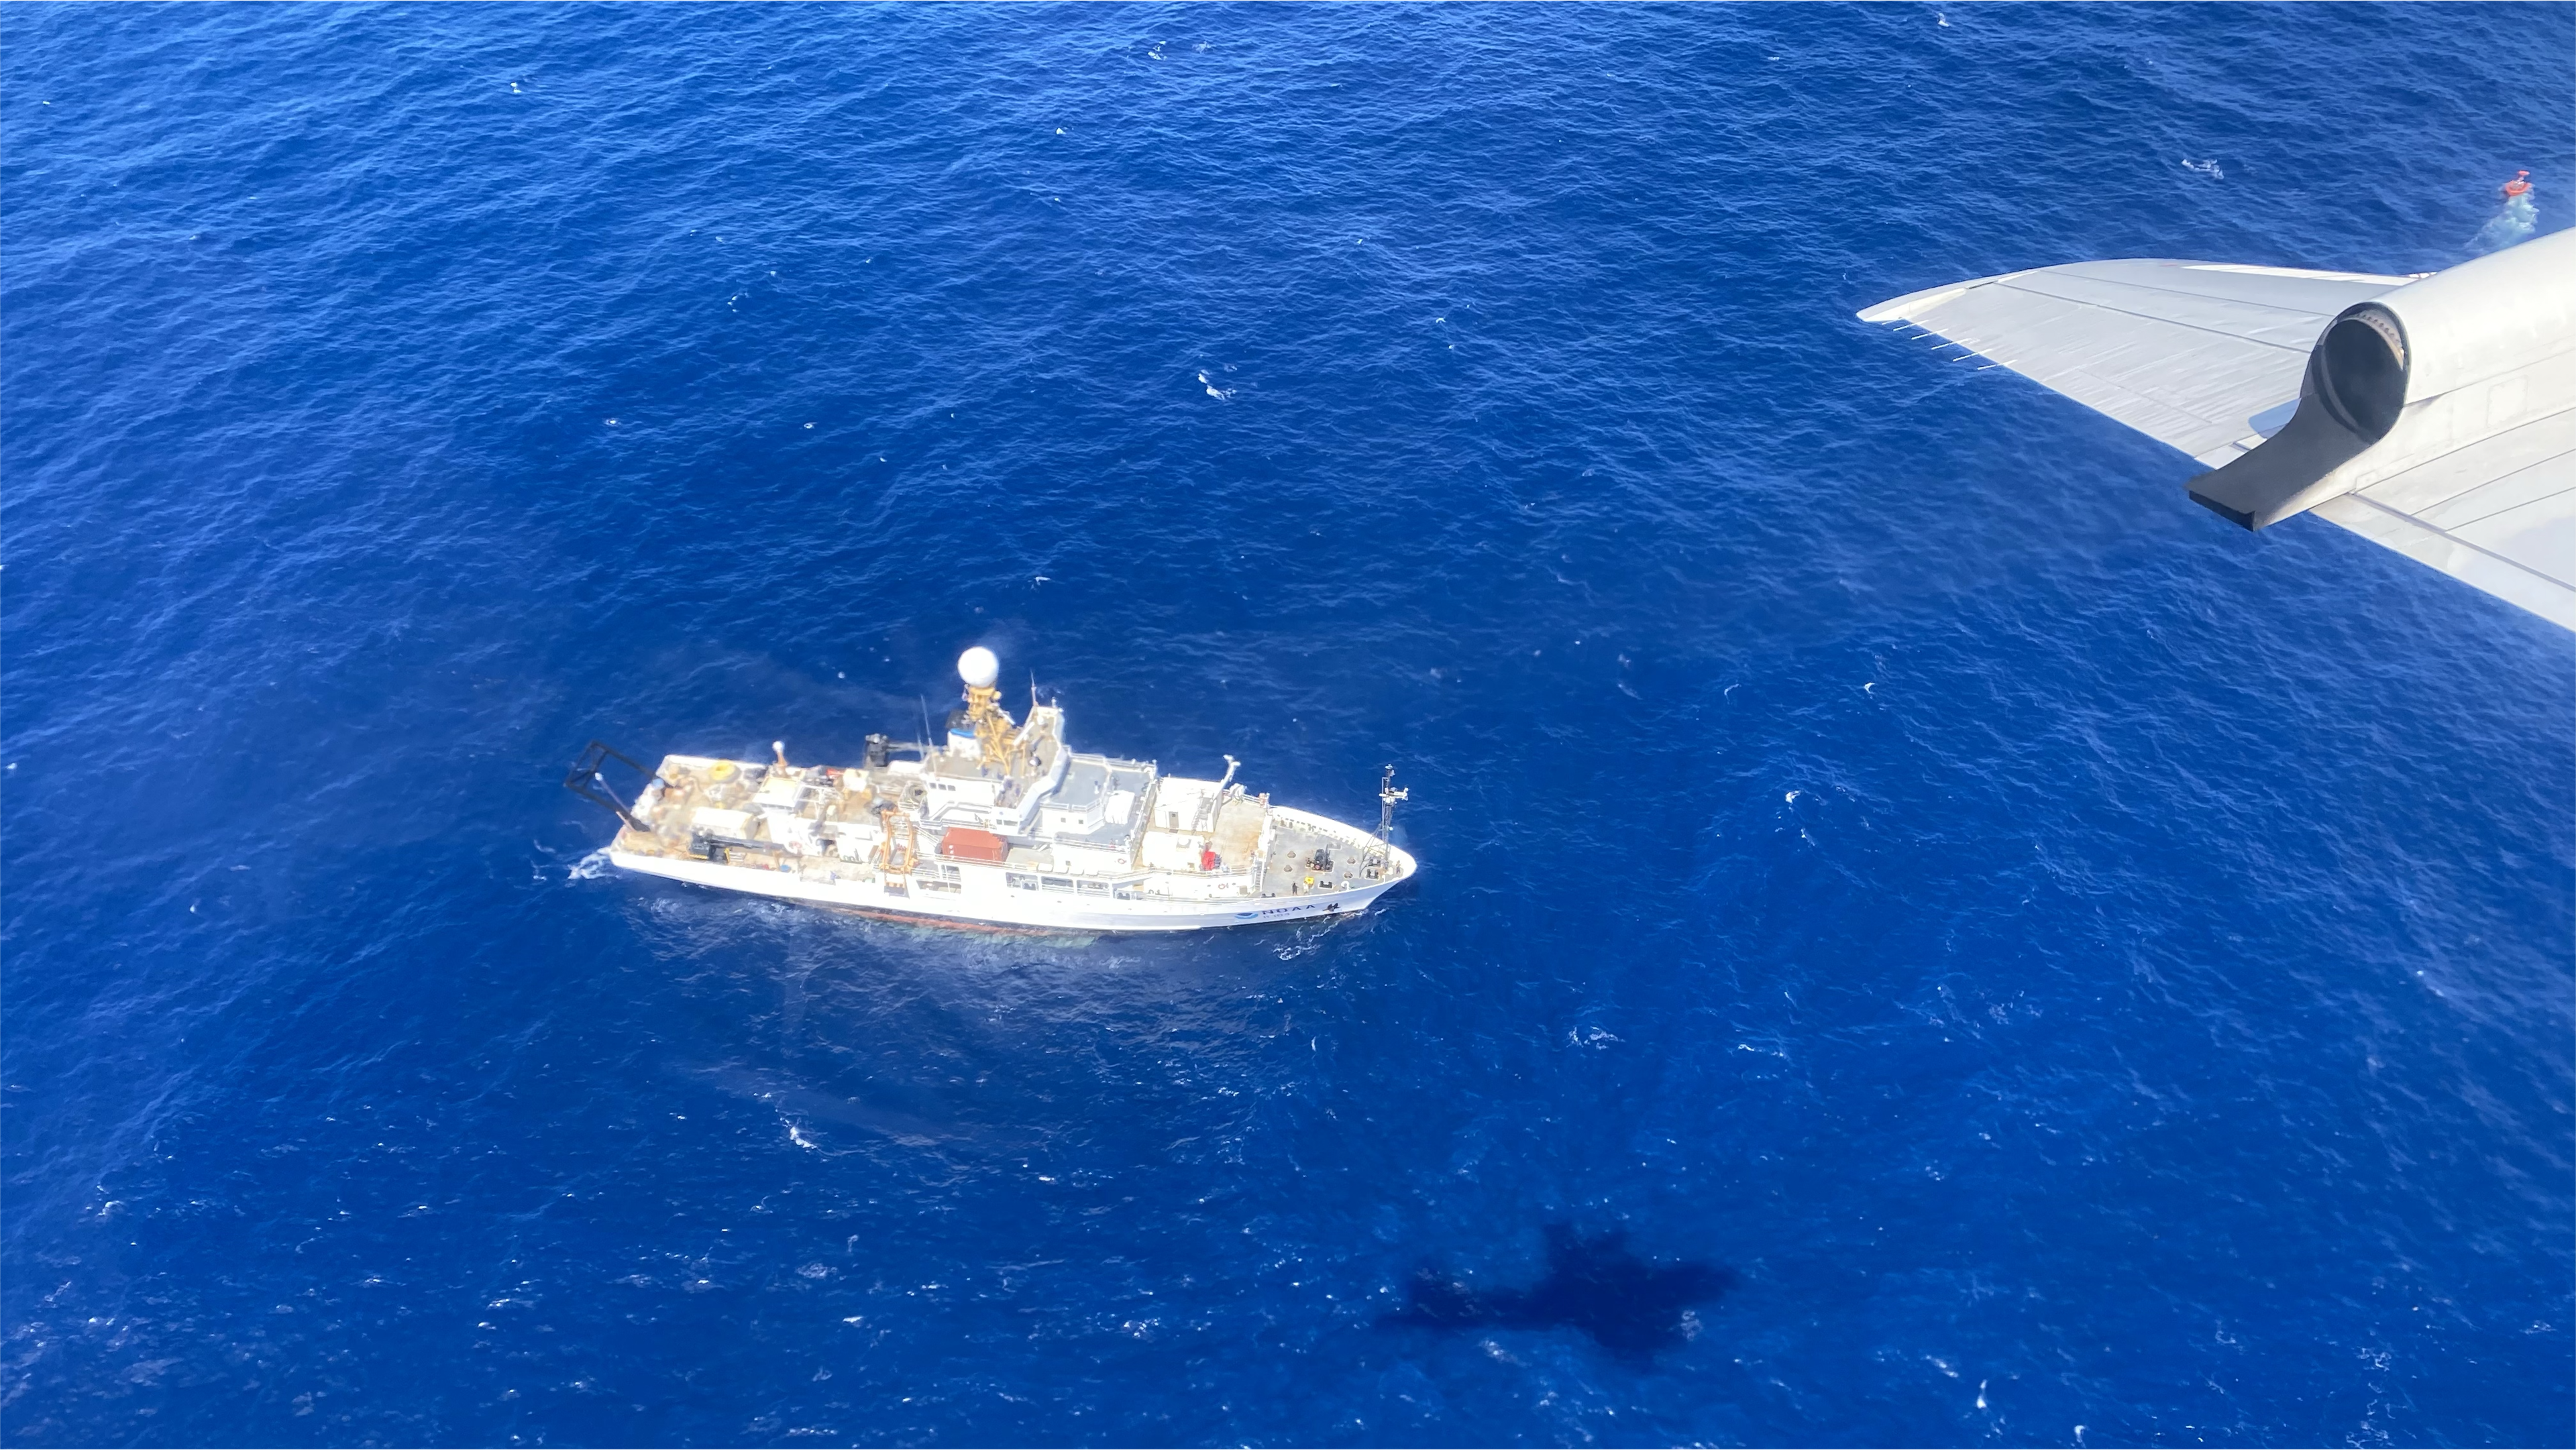 A view of the NOAA Ship <em>Ronald Brown</em> from the P3 aircraft on Jan 23.